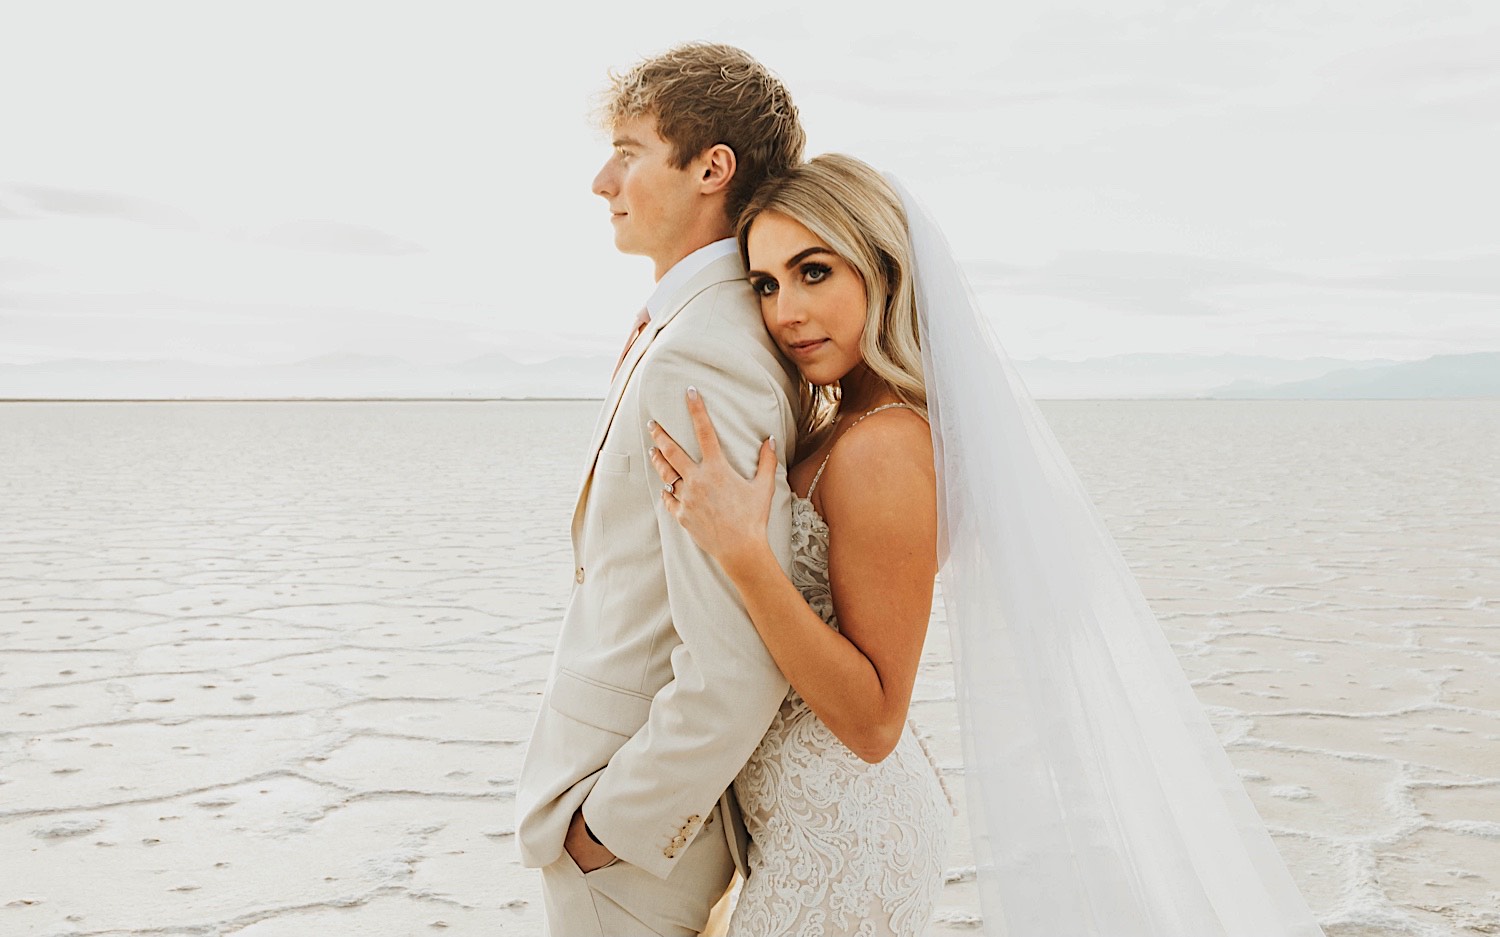 A groom looks off camera as the bride embraces him from behind and looks towards the camera while standing in the Utah Salt Flats on the day of their elopement